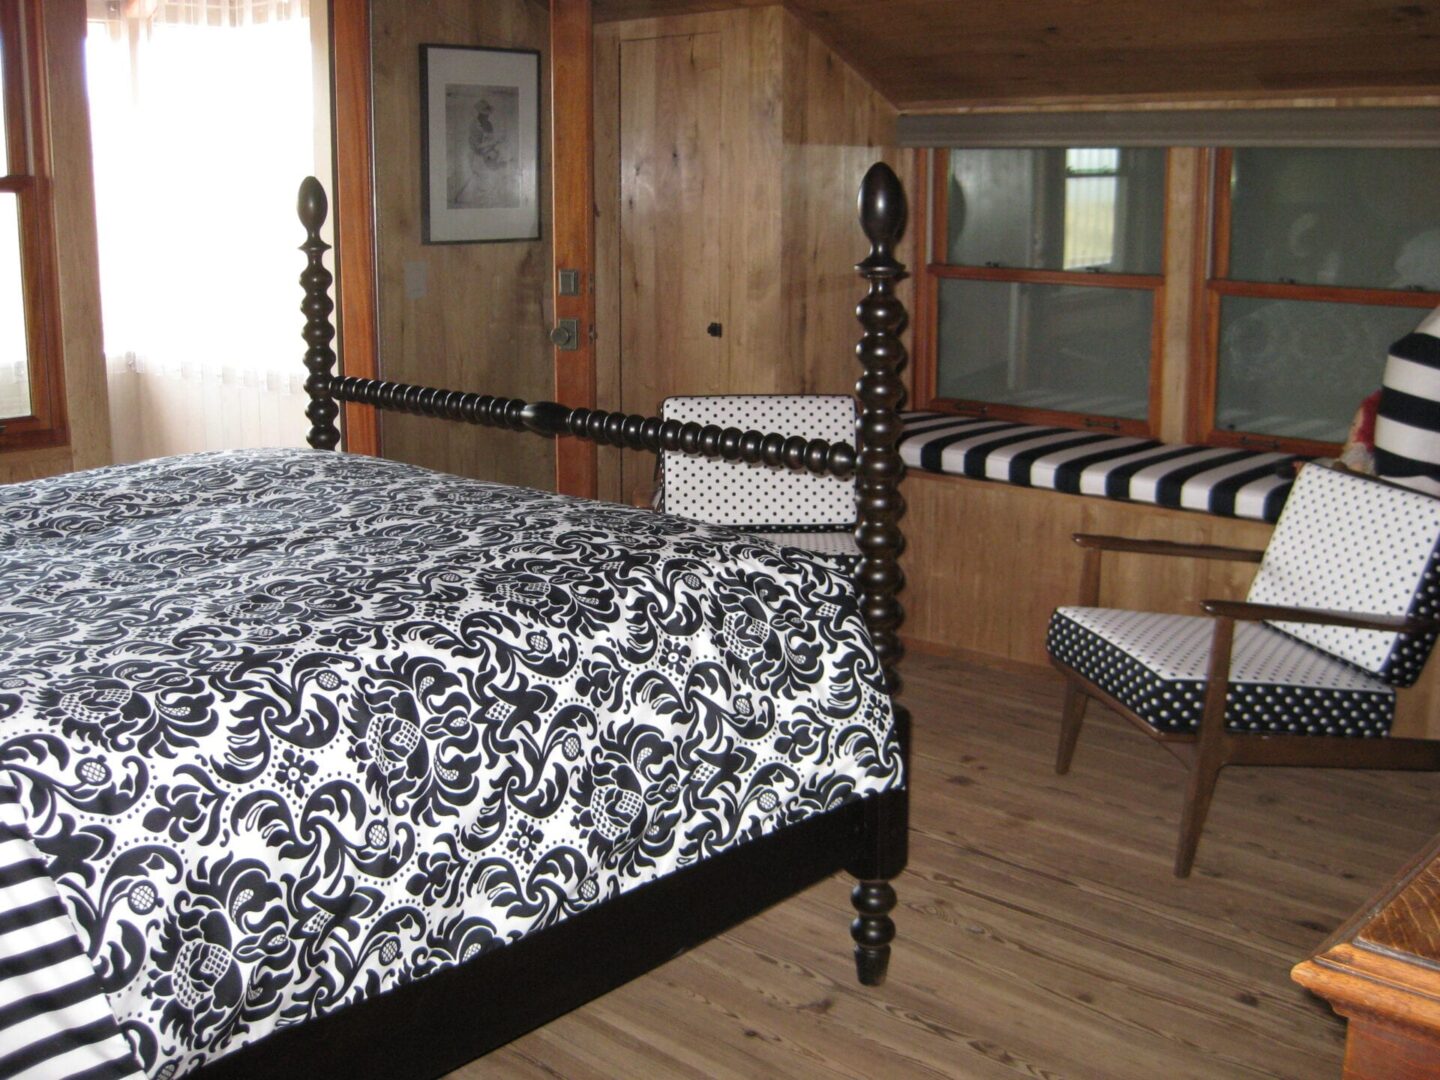 A bedroom with black and white bedding, wooden walls.